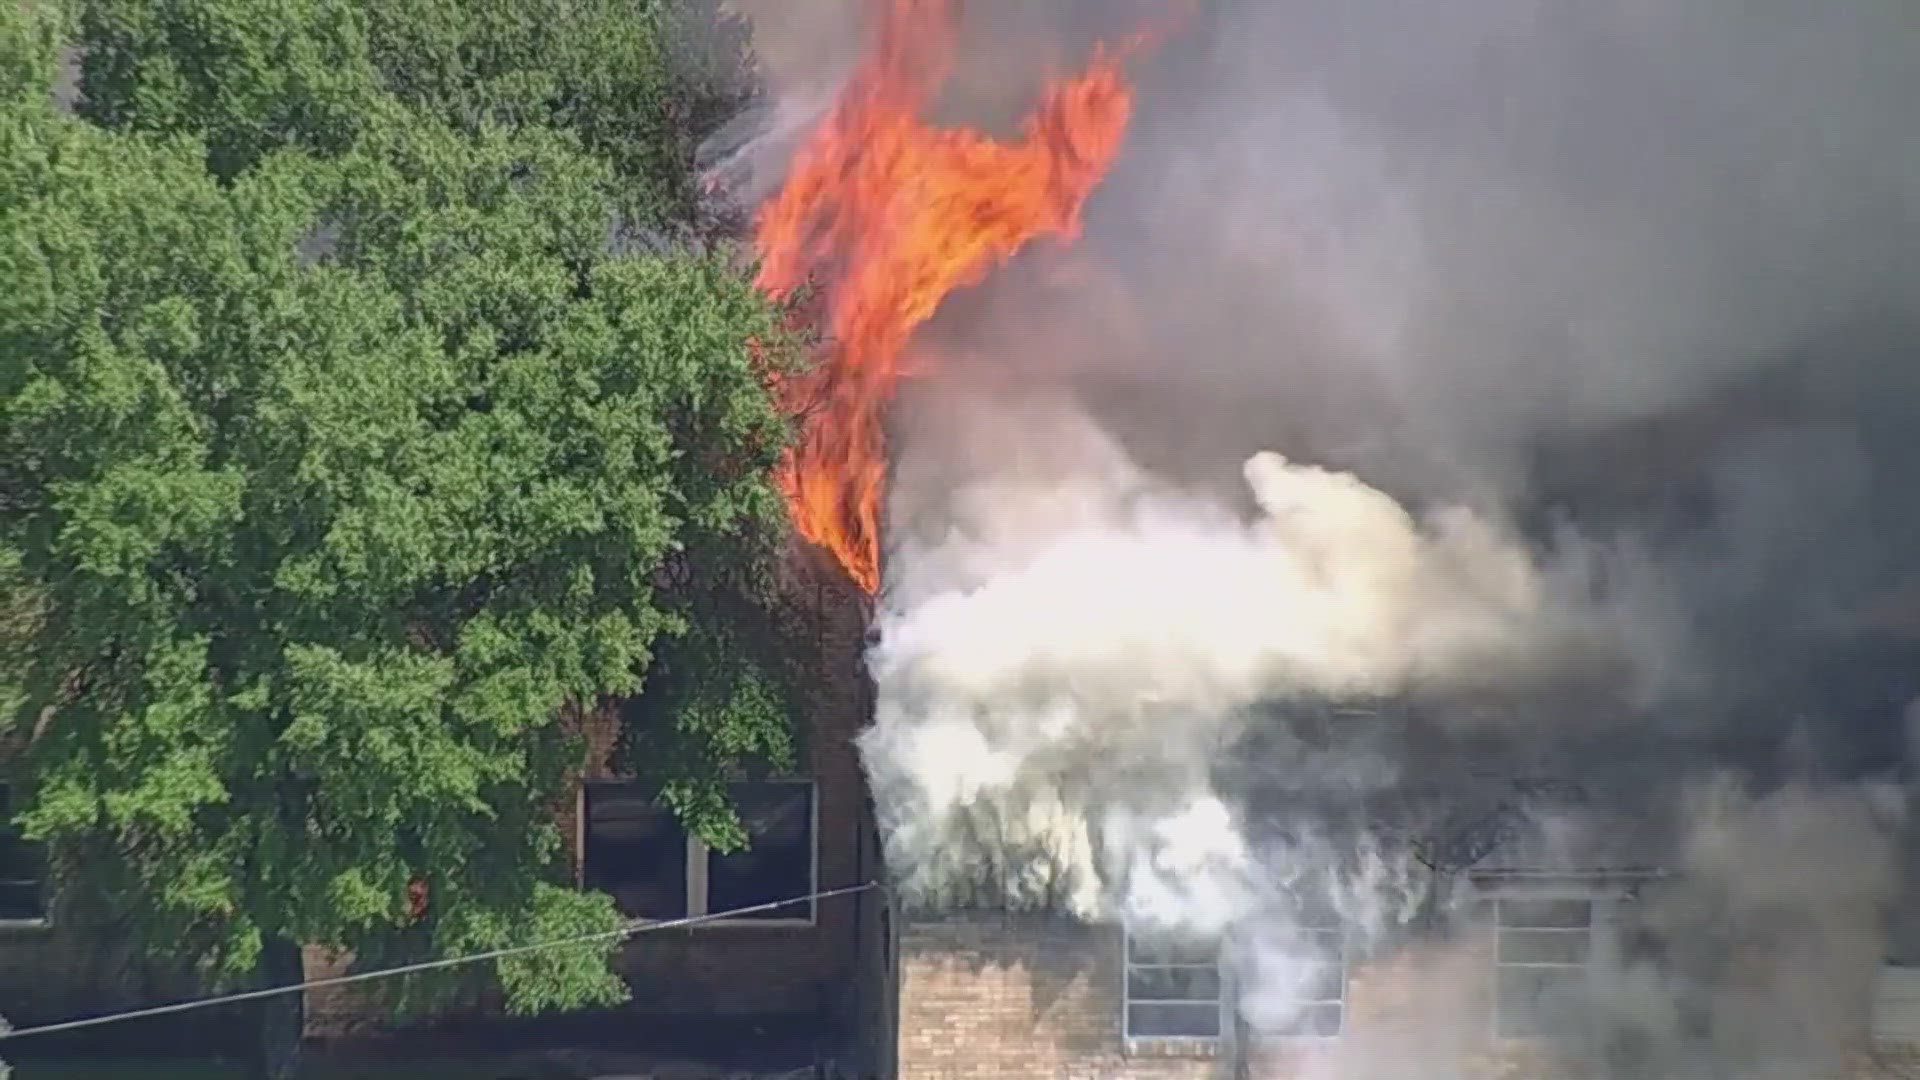 A church went up in flames near Dallas Love Field Tuesday afternoon.